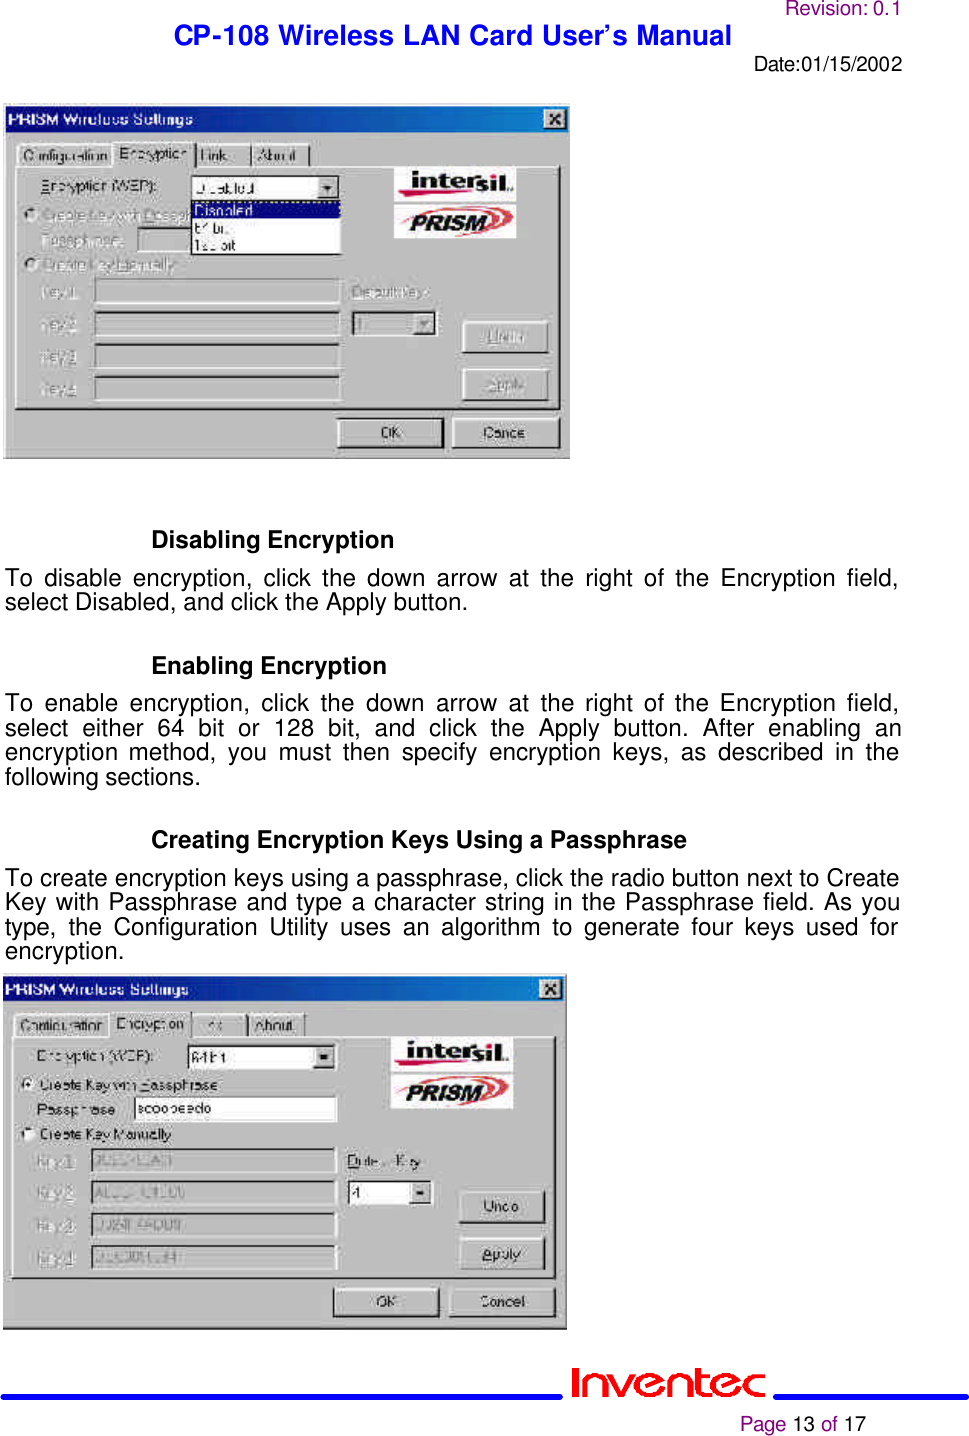 Revision: 0.1 CP-108 Wireless LAN Card User’s Manual Date:01/15/2002                                                                                                                                                             Page 13 of 17                   Disabling Encryption To disable encryption, click the down arrow at the right of the Encryption field, select Disabled, and click the Apply button.   Enabling Encryption To enable encryption, click the down arrow at the right of the Encryption field, select either 64 bit or 128 bit, and click the Apply button. After enabling an encryption method, you must then specify encryption keys, as described in the following sections.   Creating Encryption Keys Using a Passphrase To create encryption keys using a passphrase, click the radio button next to Create Key with Passphrase and type a character string in the Passphrase field. As you type, the Configuration Utility uses an algorithm to generate four keys used for encryption.                 